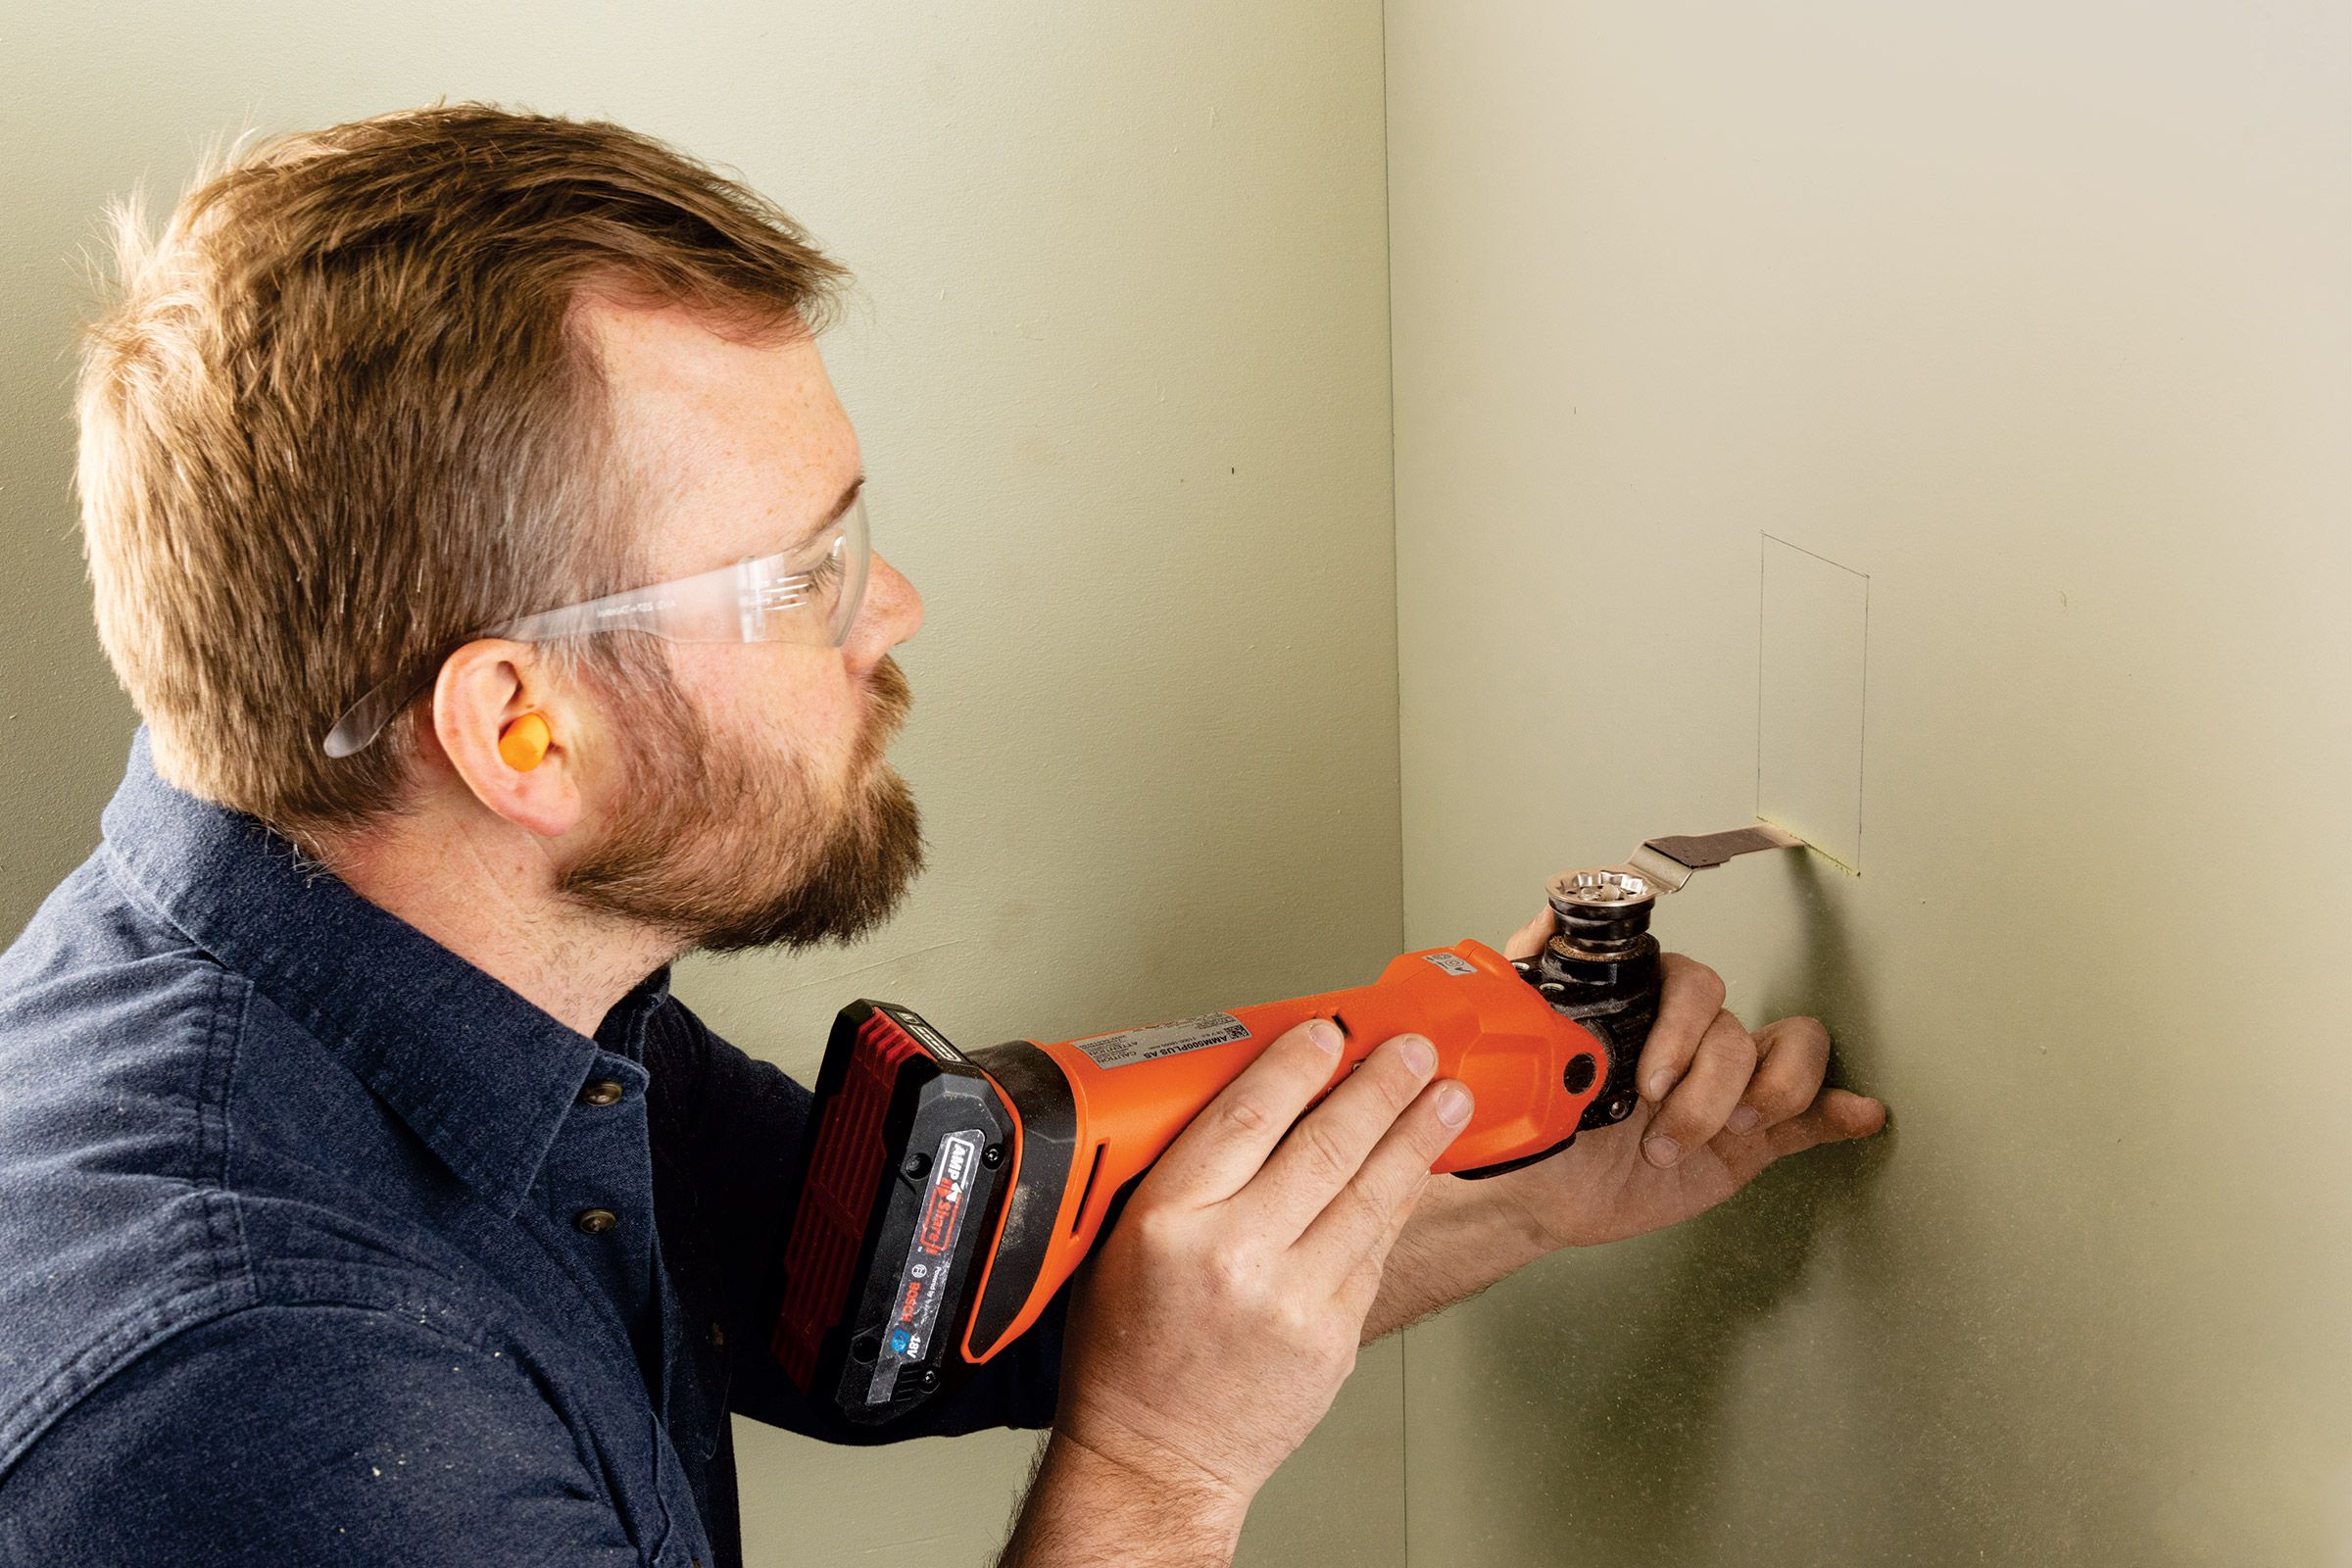 Nathan Gilbert cutting drywall with an oscillating multitool